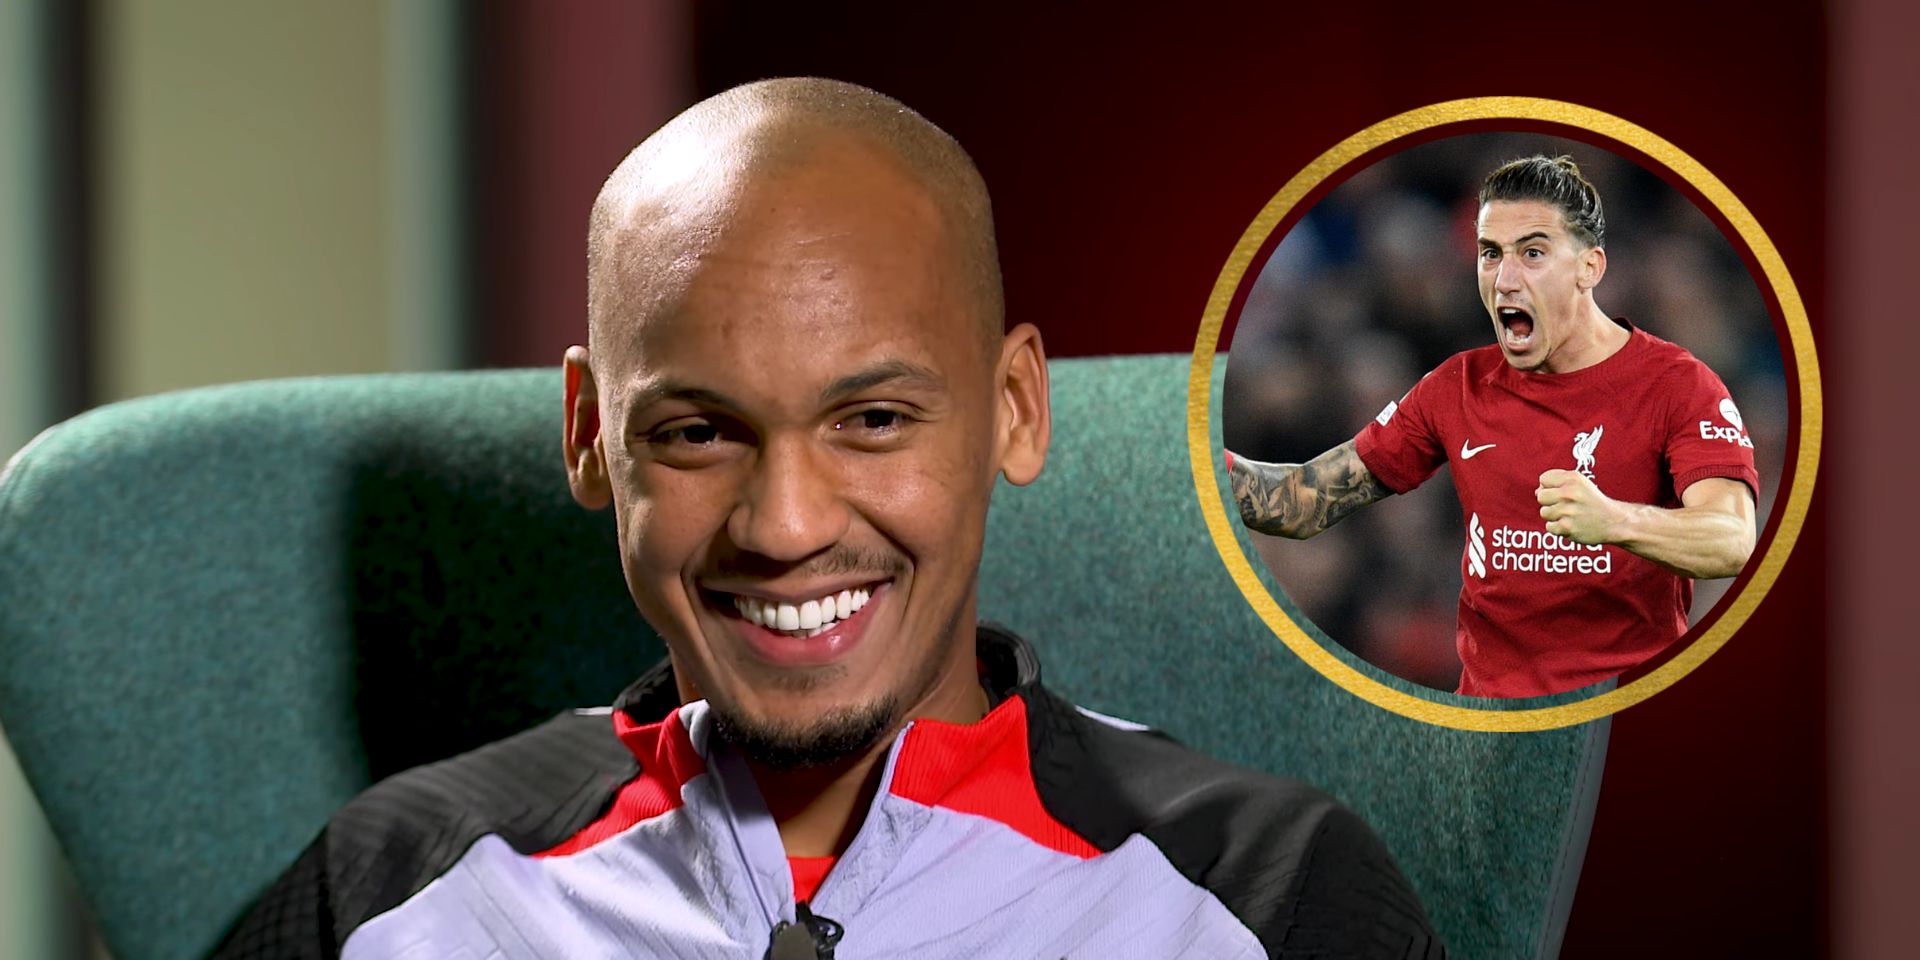 (Video) “This guy is just crazy” – Fabinho on the funniest player in the Reds squad